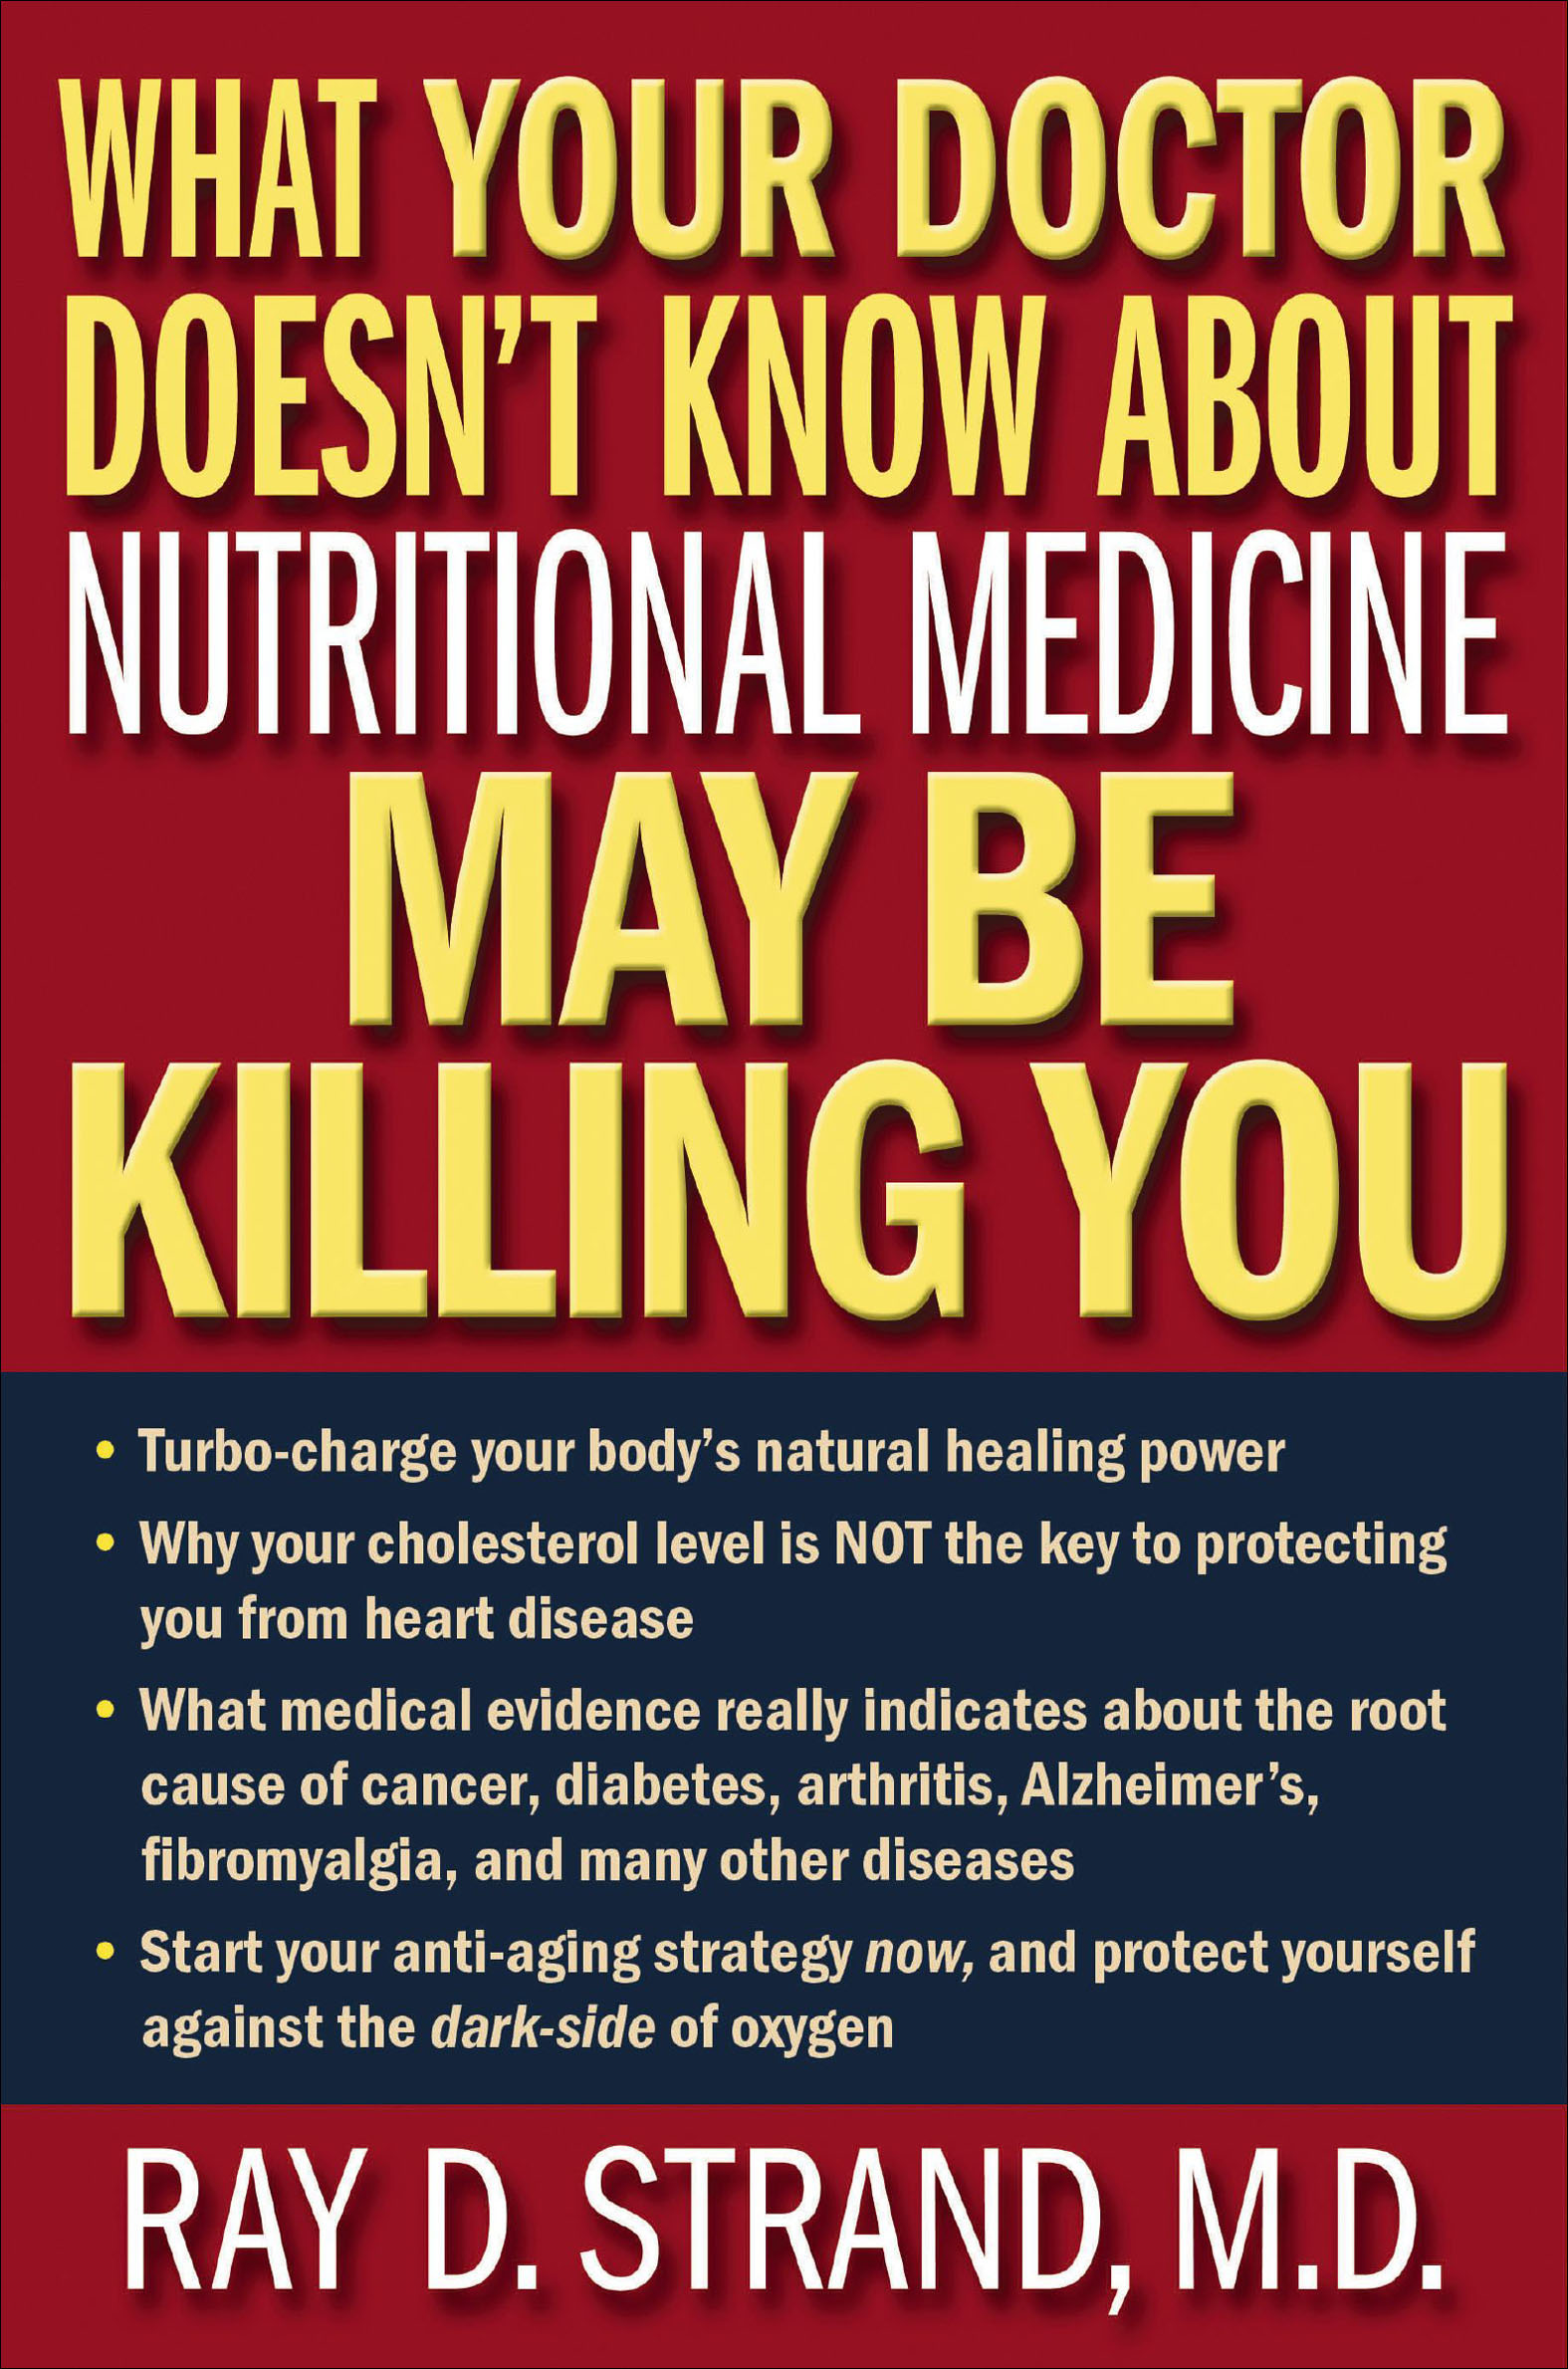 What Your Doctor Doesn't Know About Nutritional Medicine May Be Killing You cover image